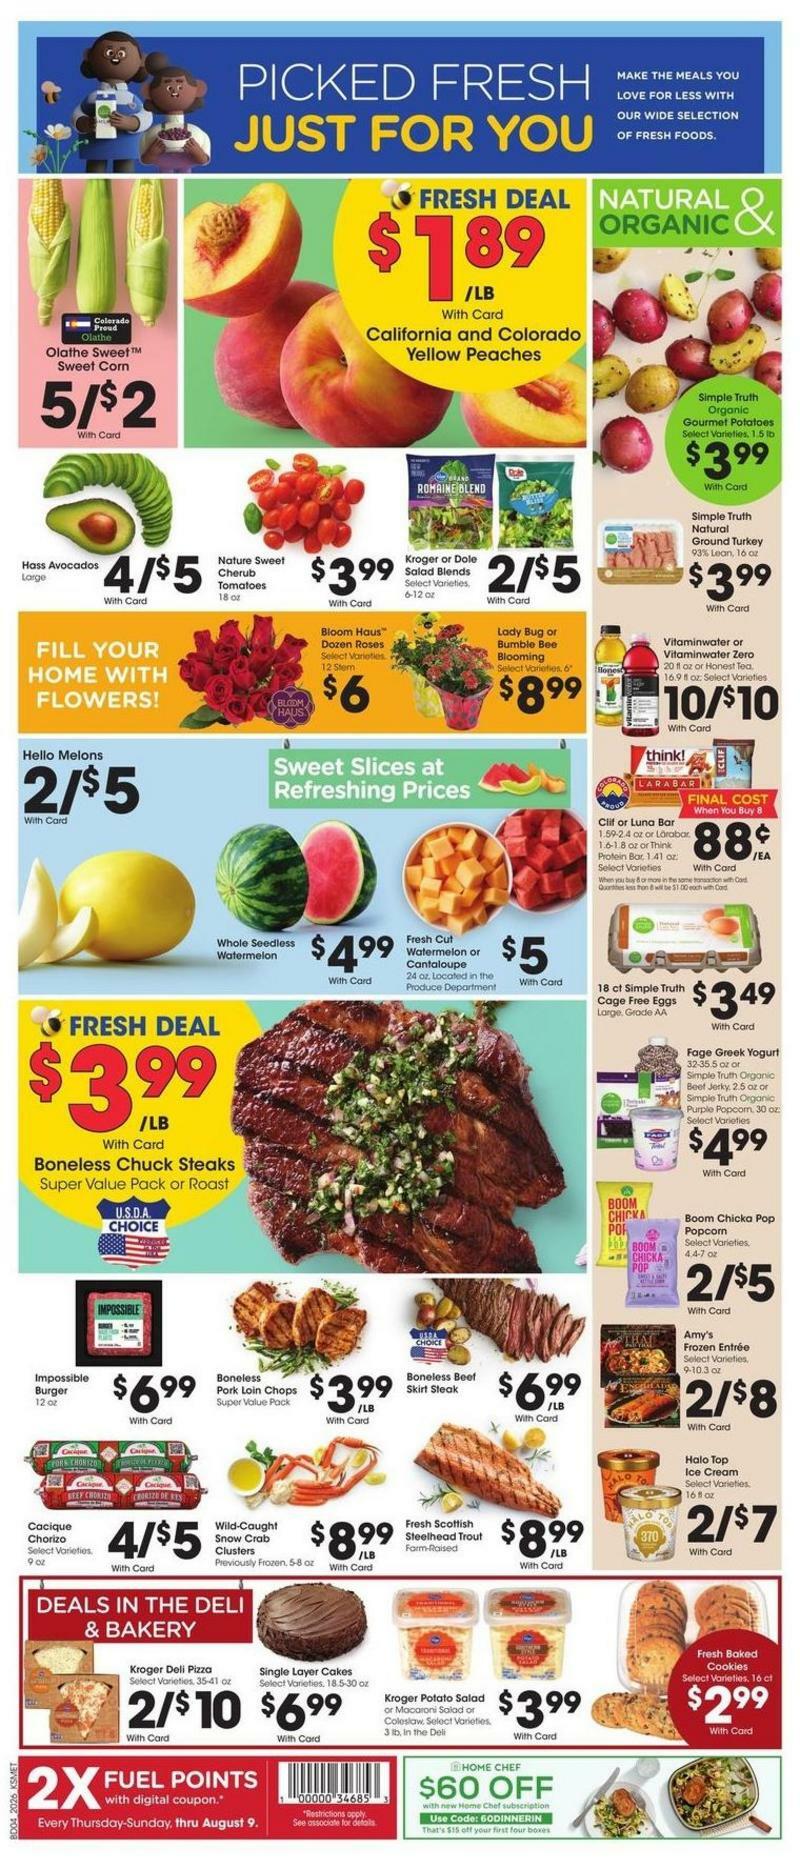 City Market Weekly Ad from July 29